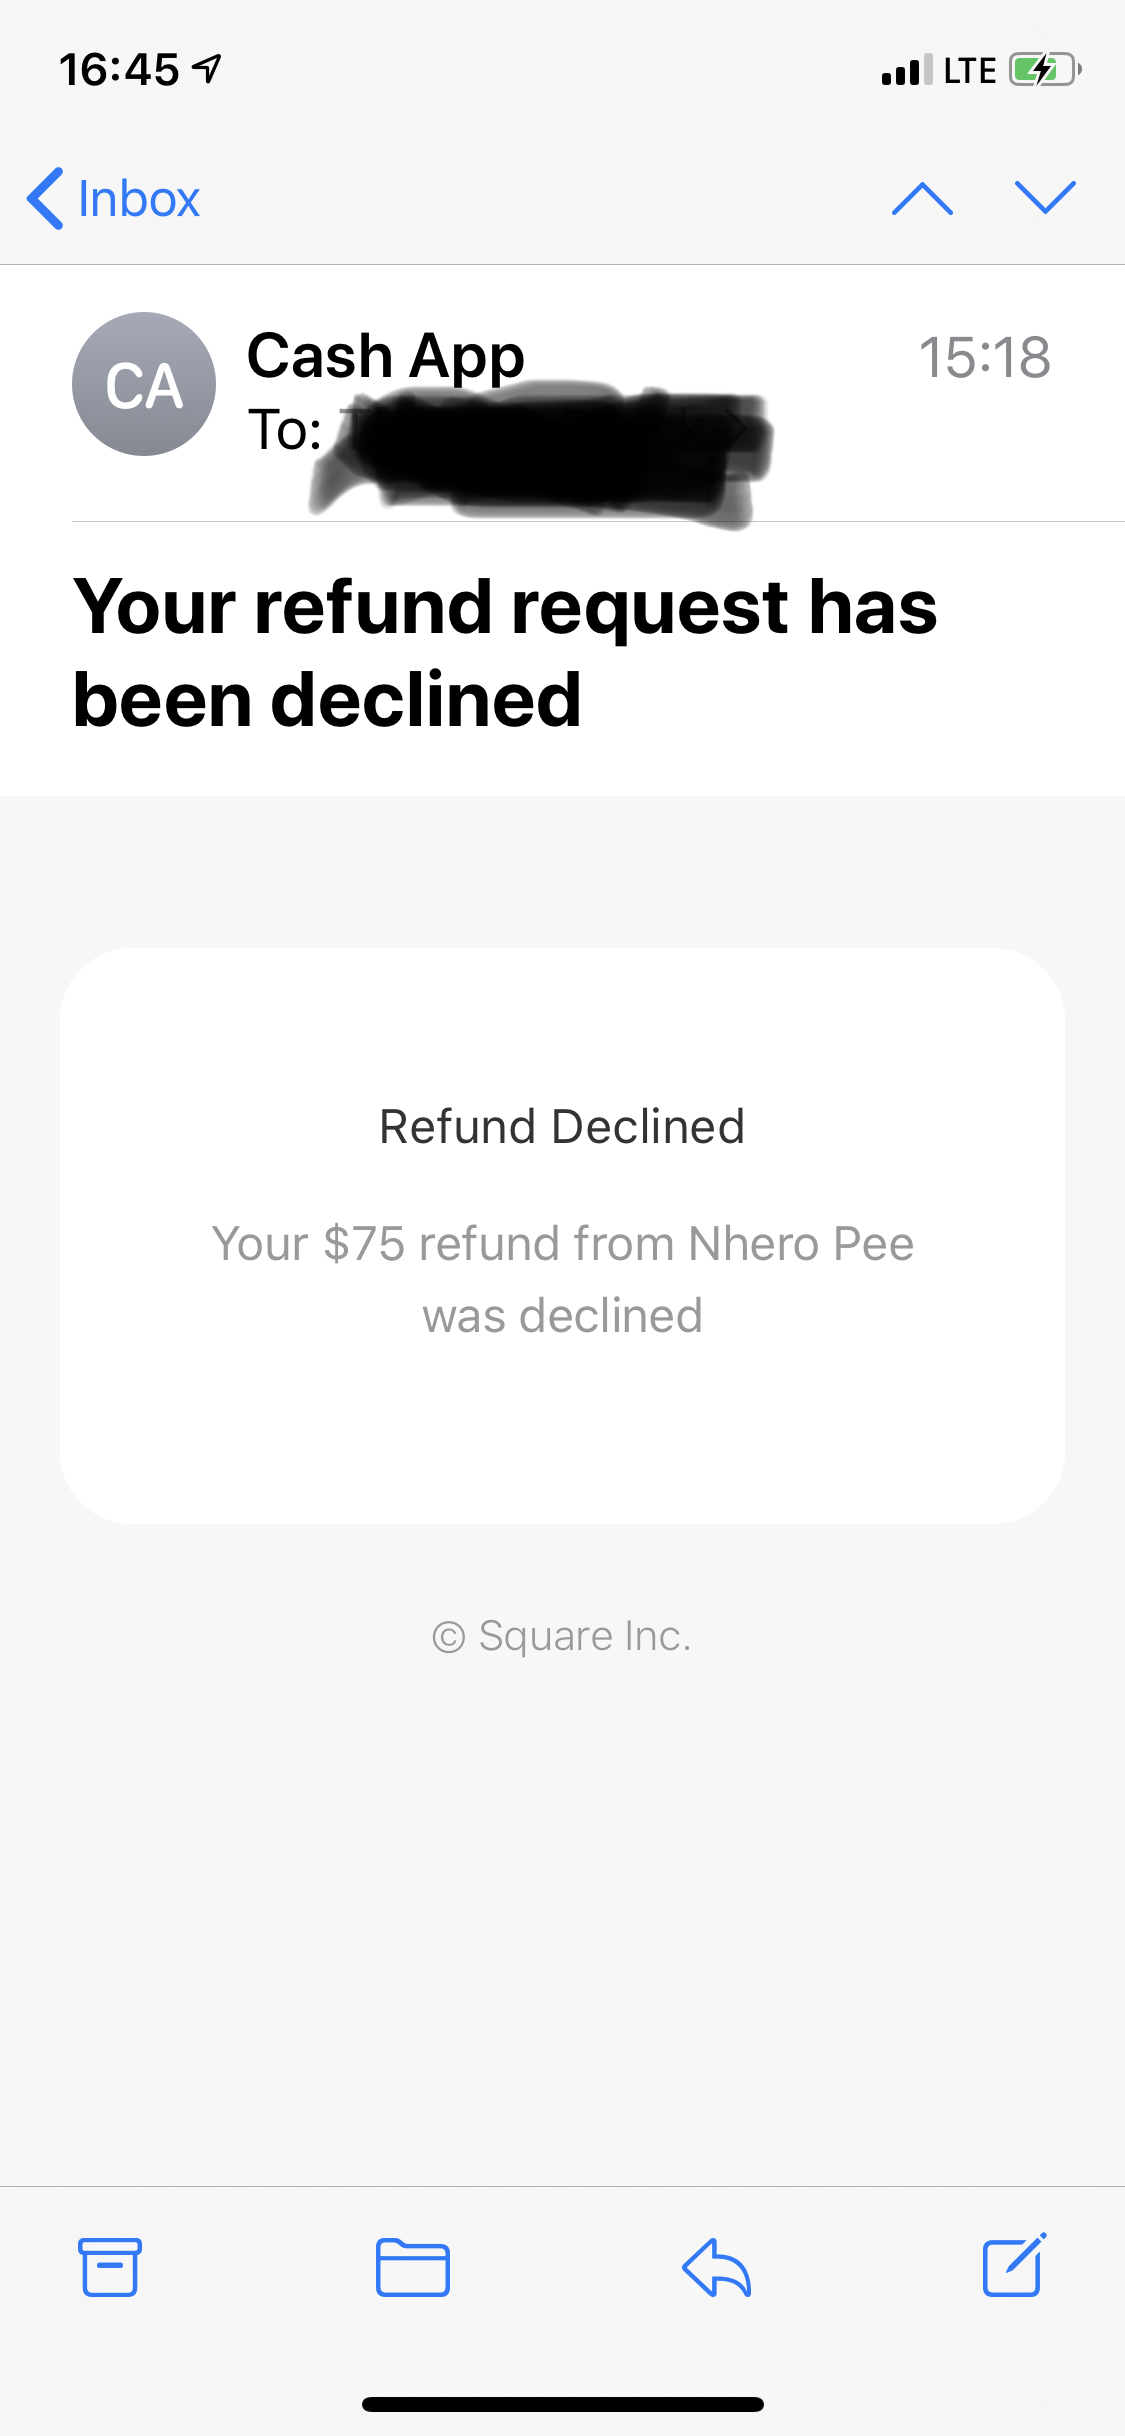 Declined refund, as expected...different name too 